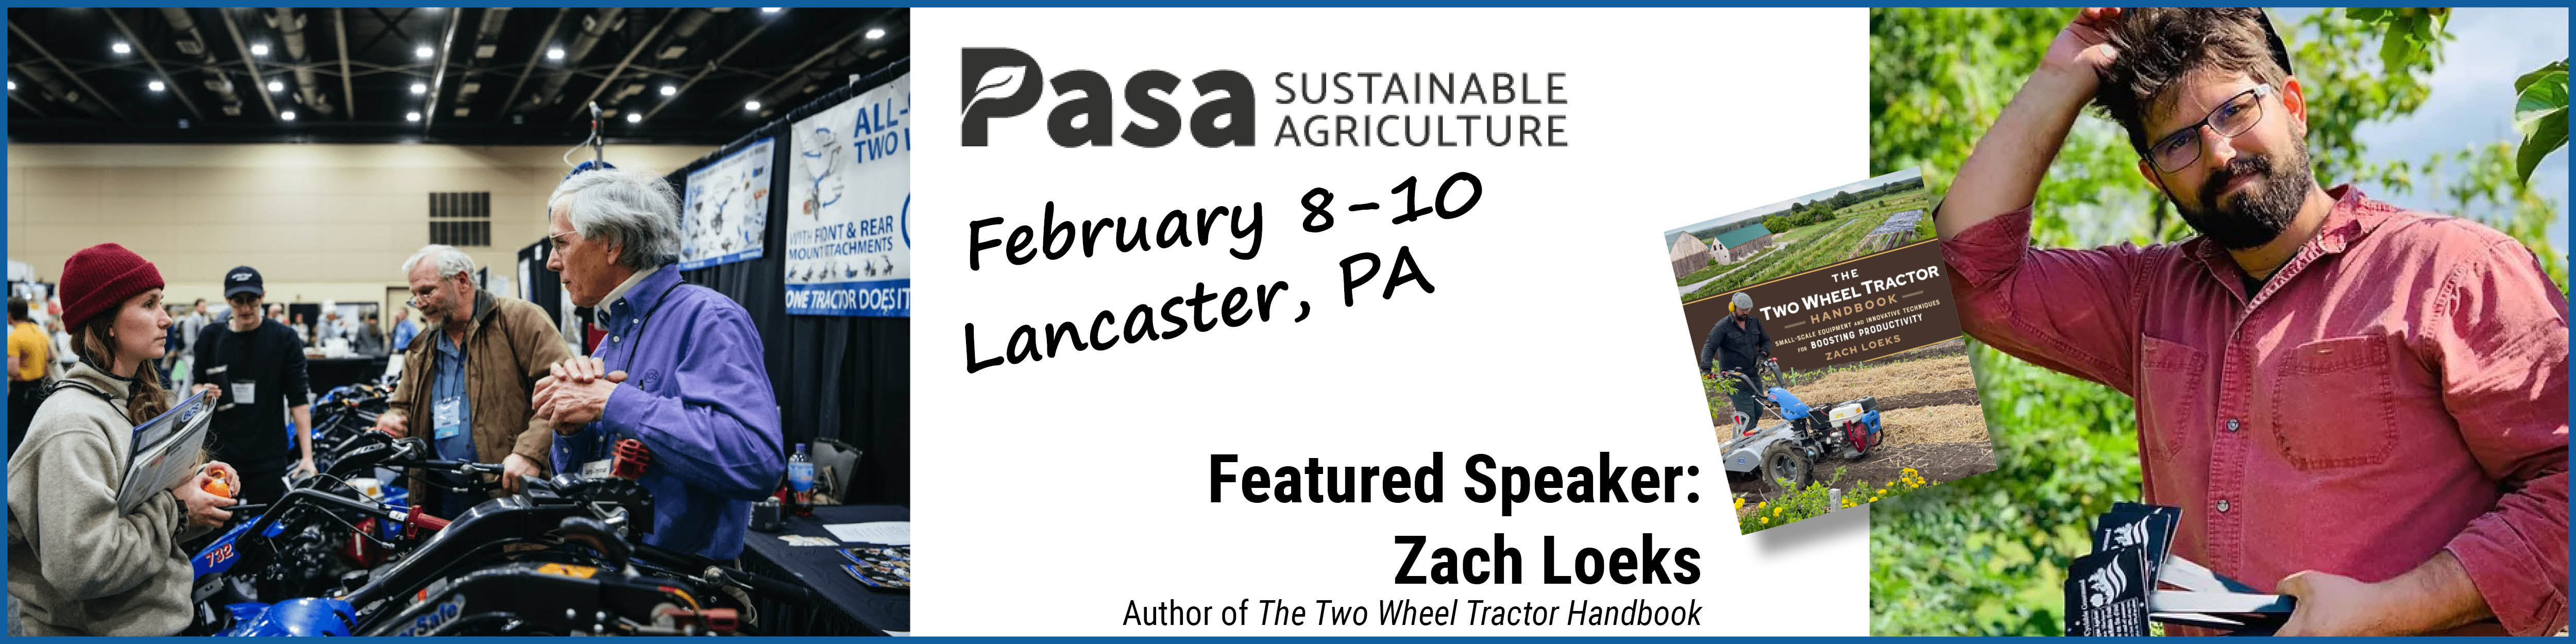 PASA Sustainable Agriculture Conference - Lancaster, PA